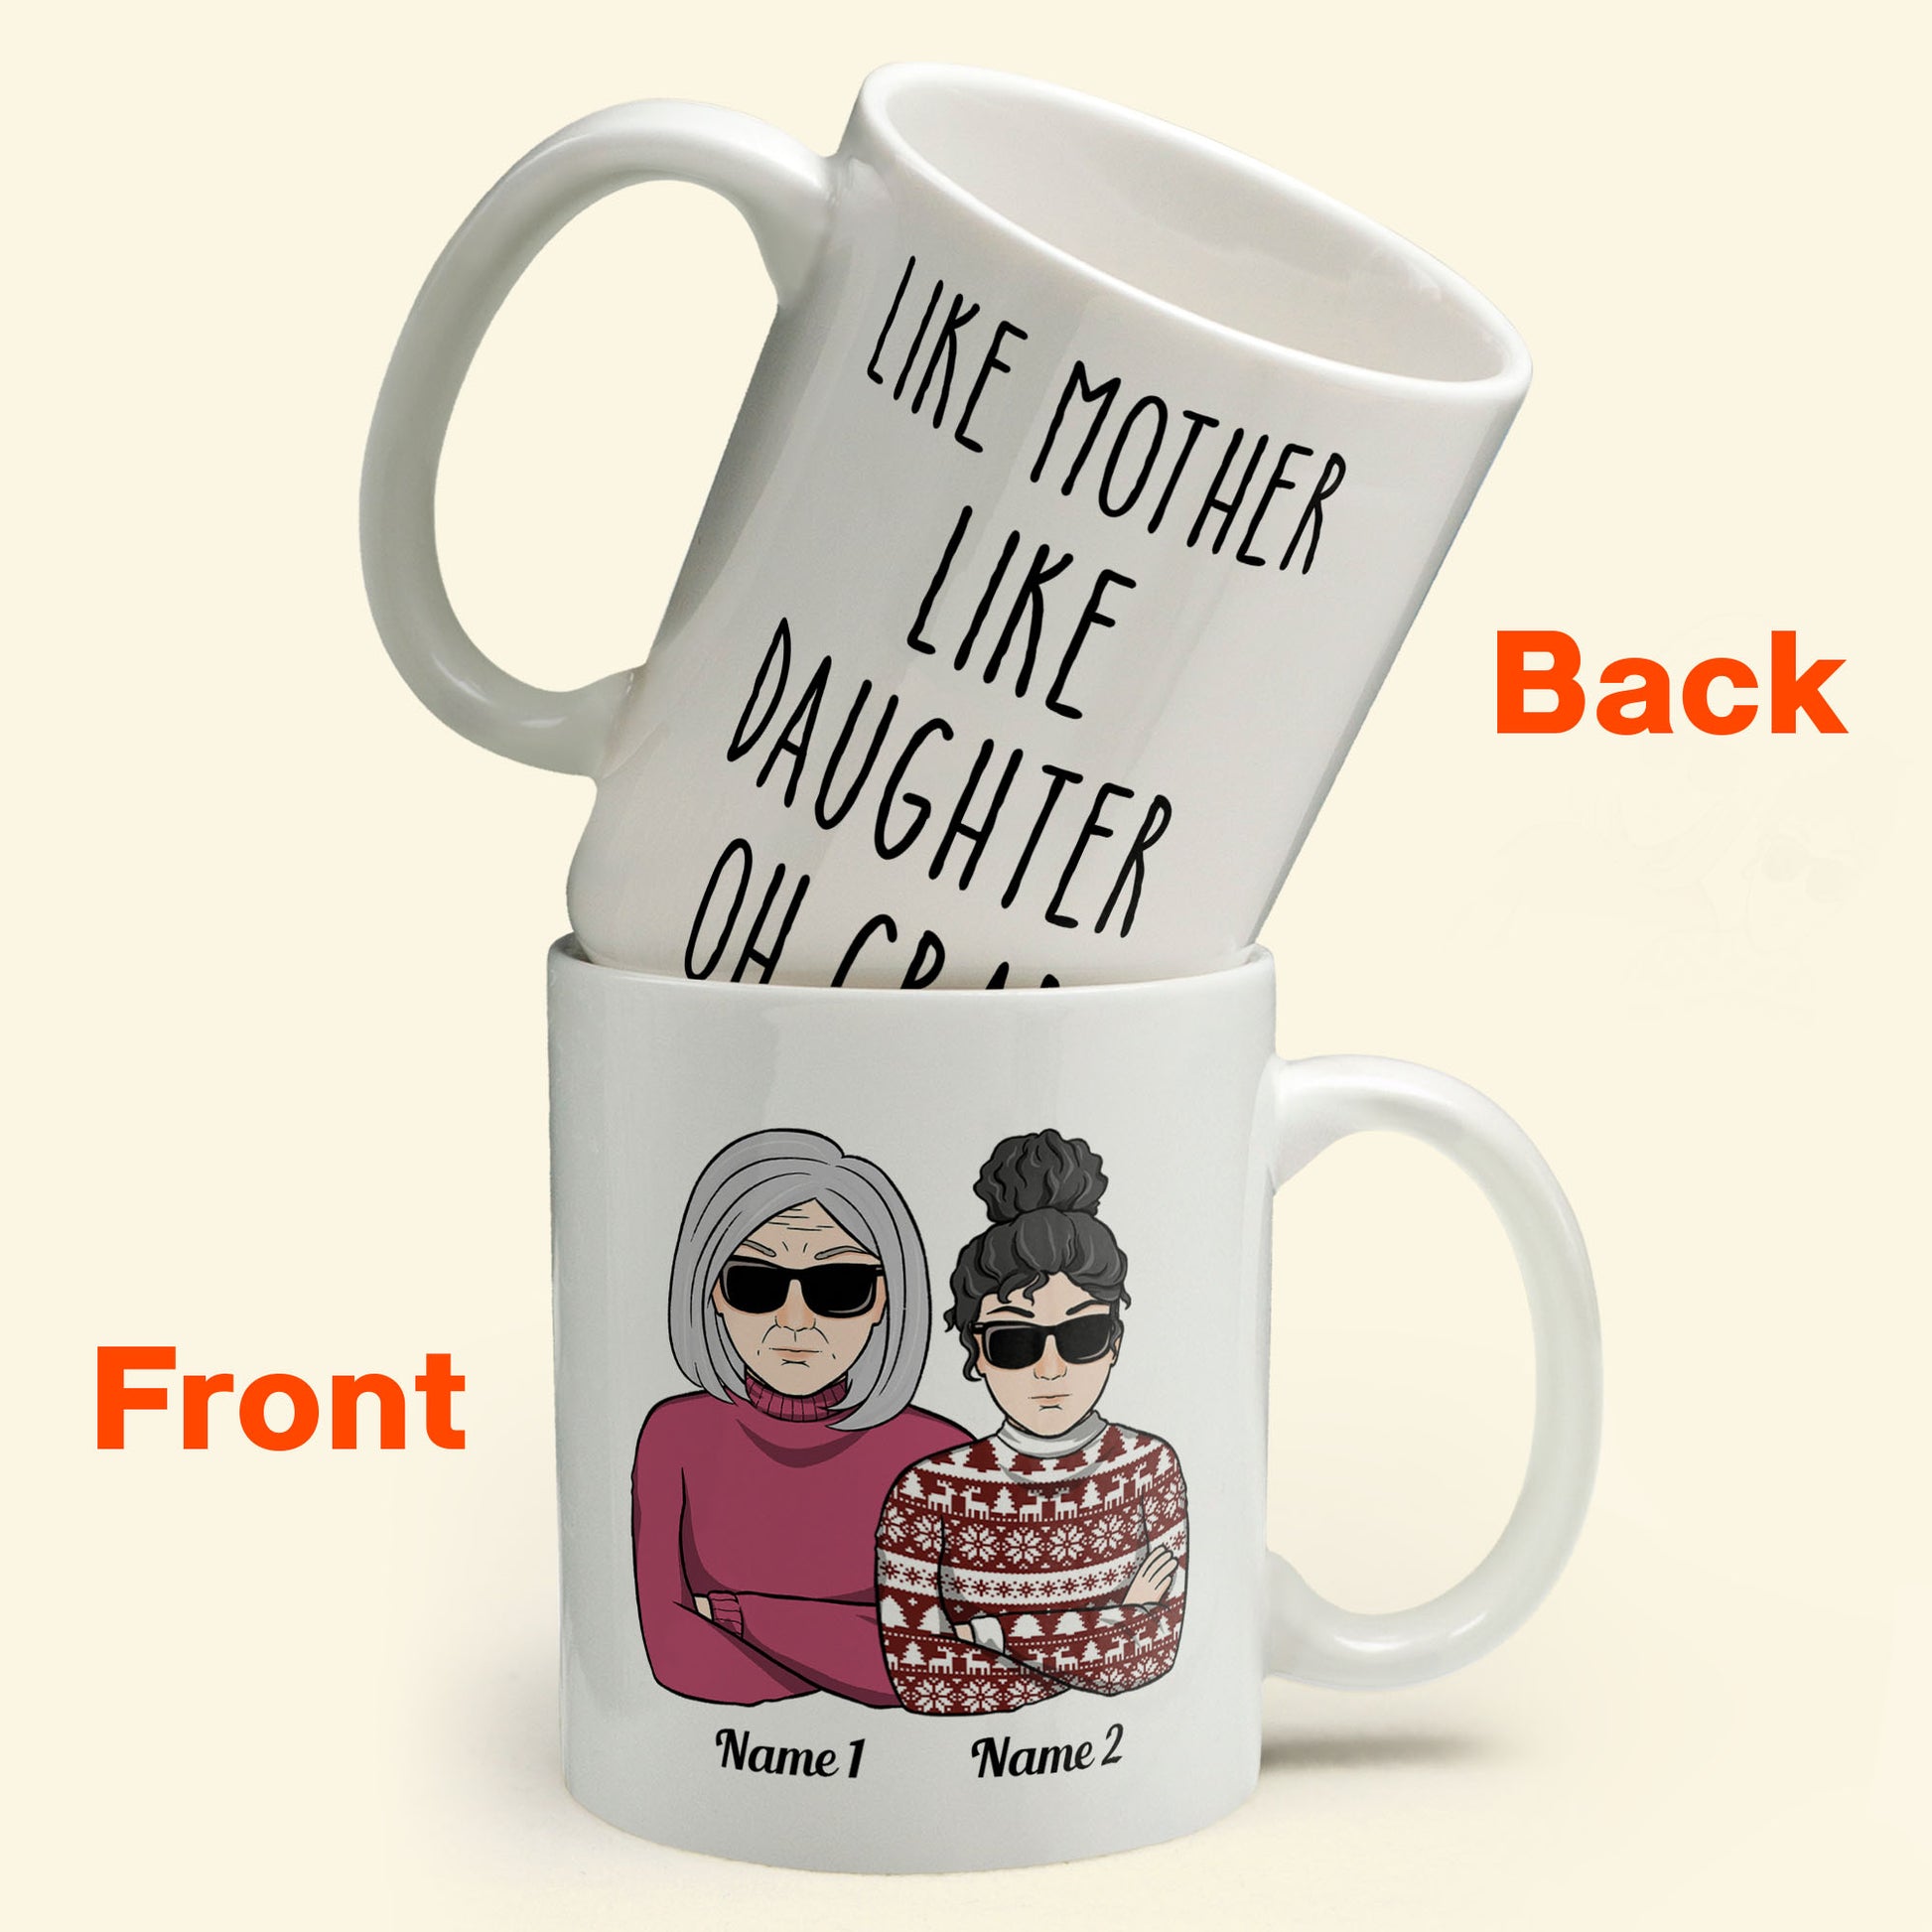 https://macorner.co/cdn/shop/products/Like-Father-Like-Daughter-Oh-Crap-Personalized-Mug-Christmas-Gift-For-Fathers_-Mothers_-Grandpas_-Grandmas_-Sons-_-Daughters_3.jpg?v=1636361984&width=1946